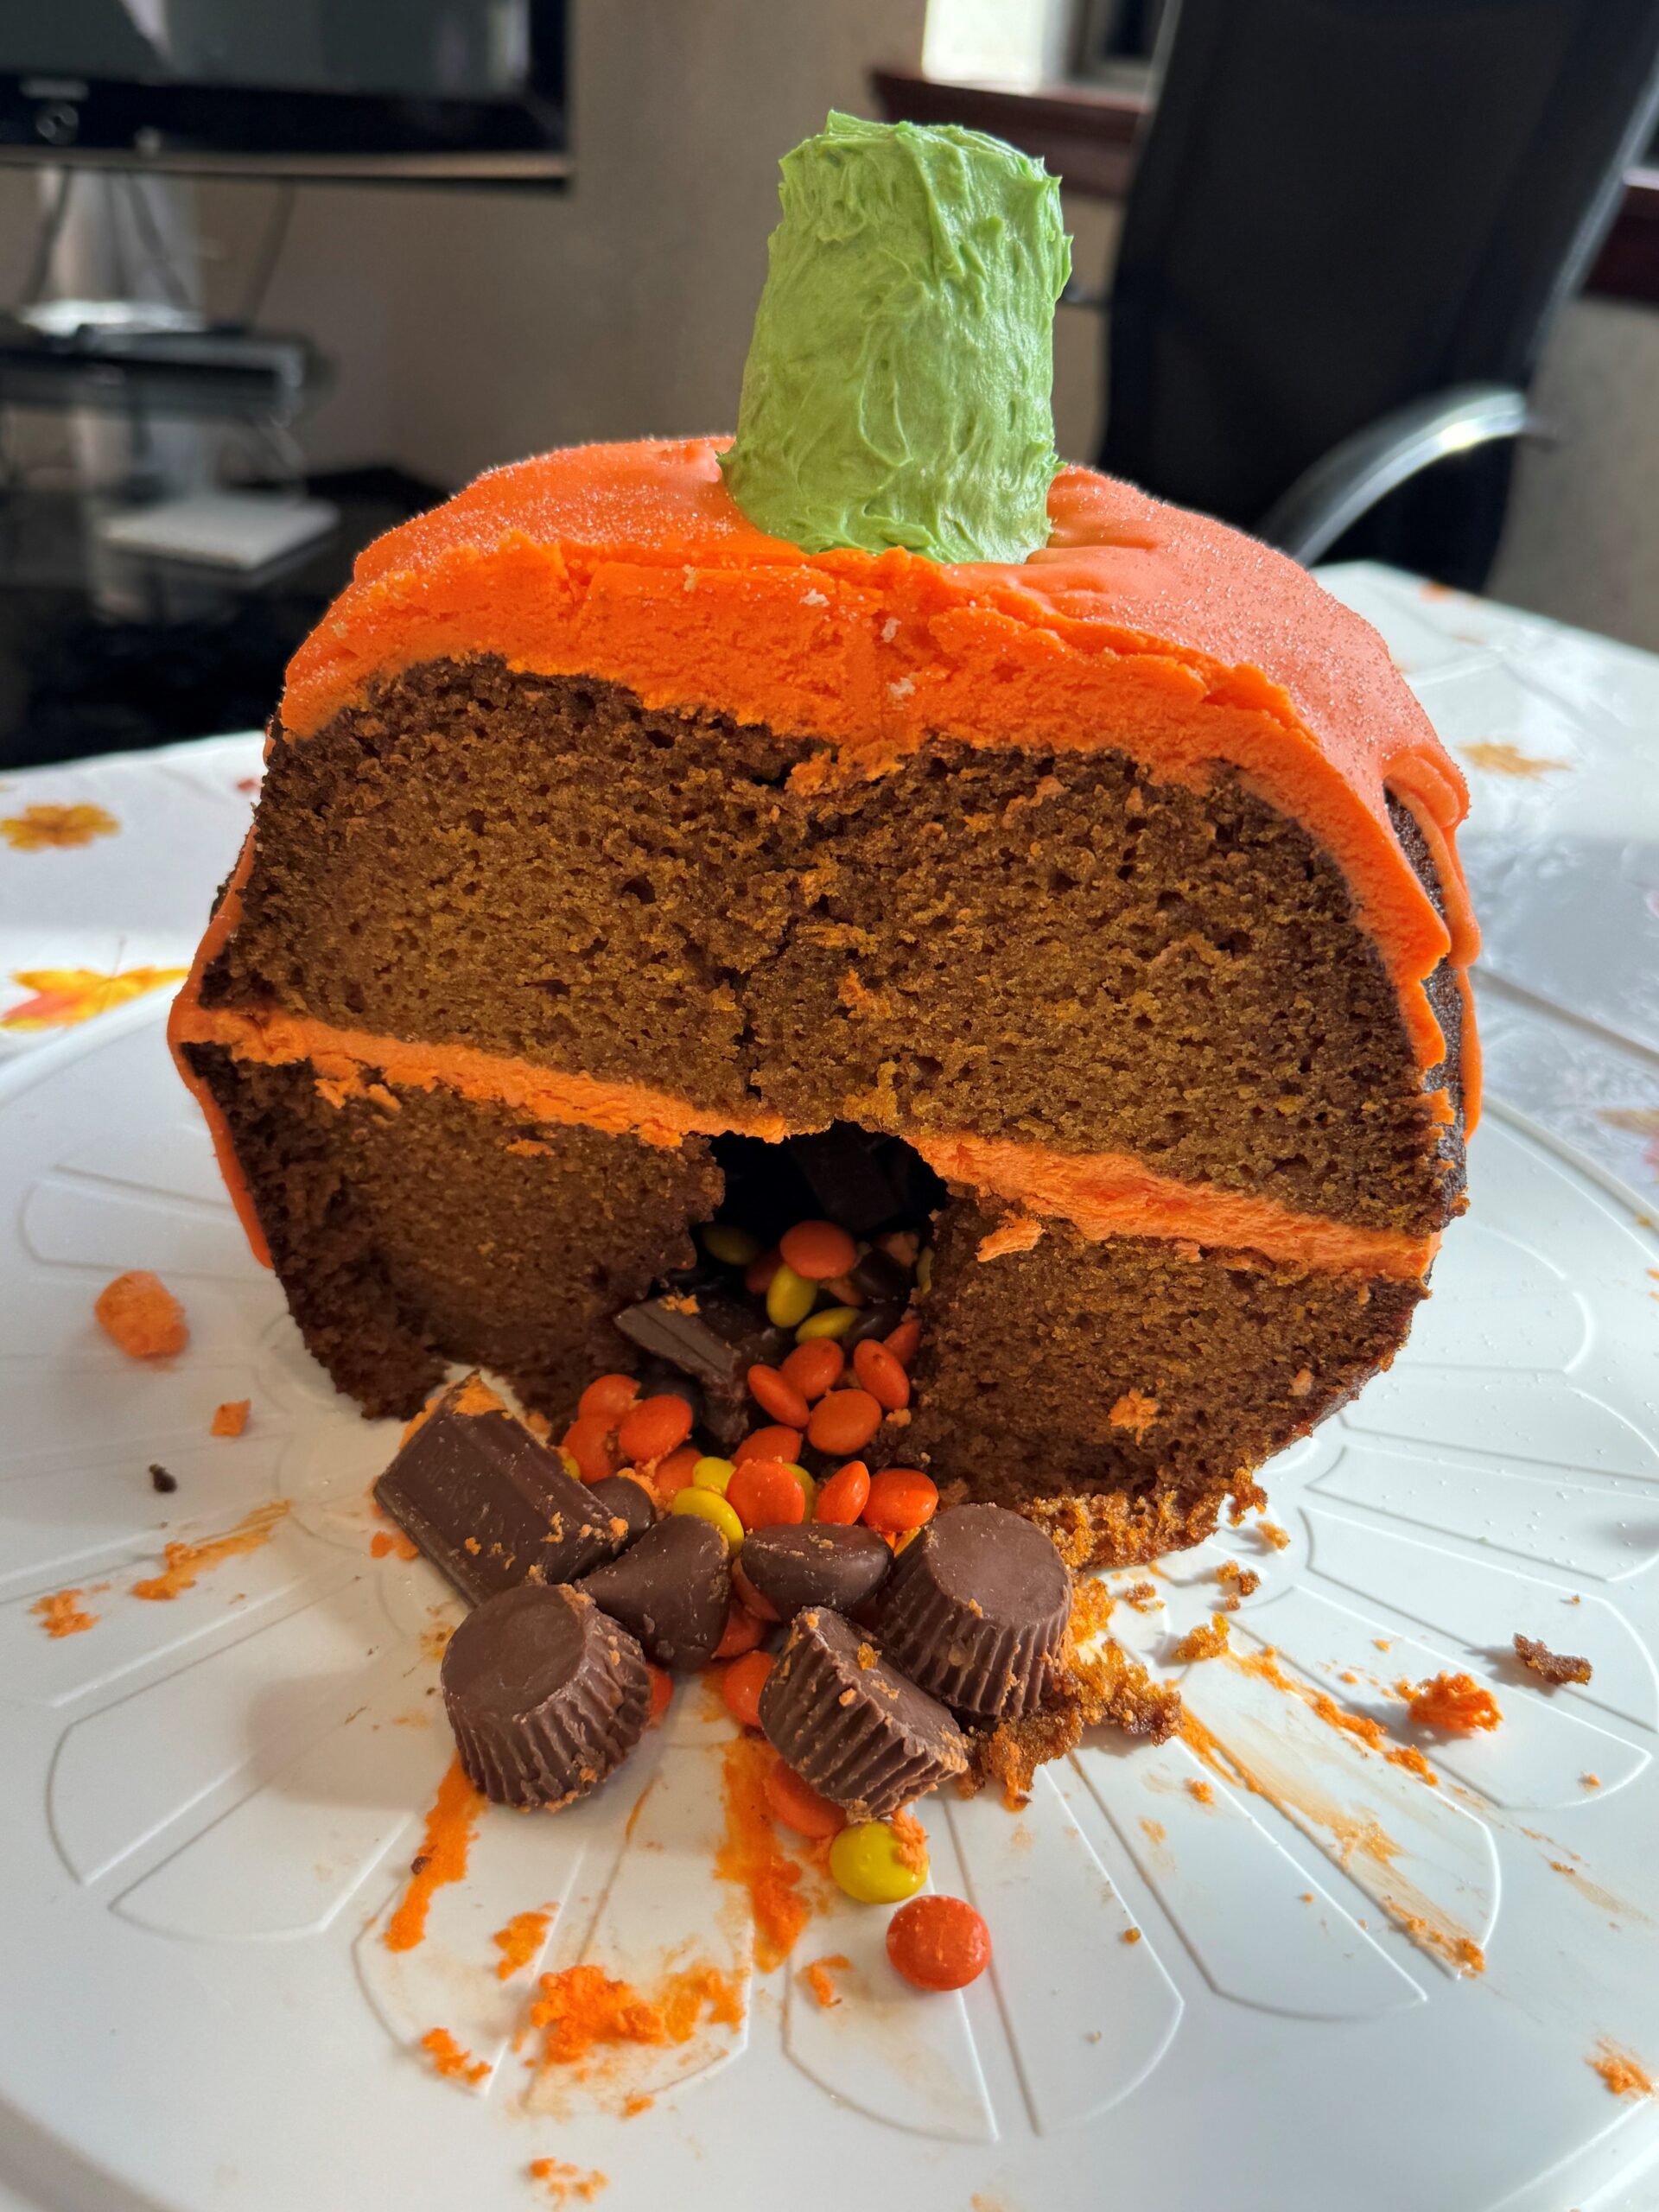 Pumpkin-shaped cake sliced in half with candy filling falling out of center